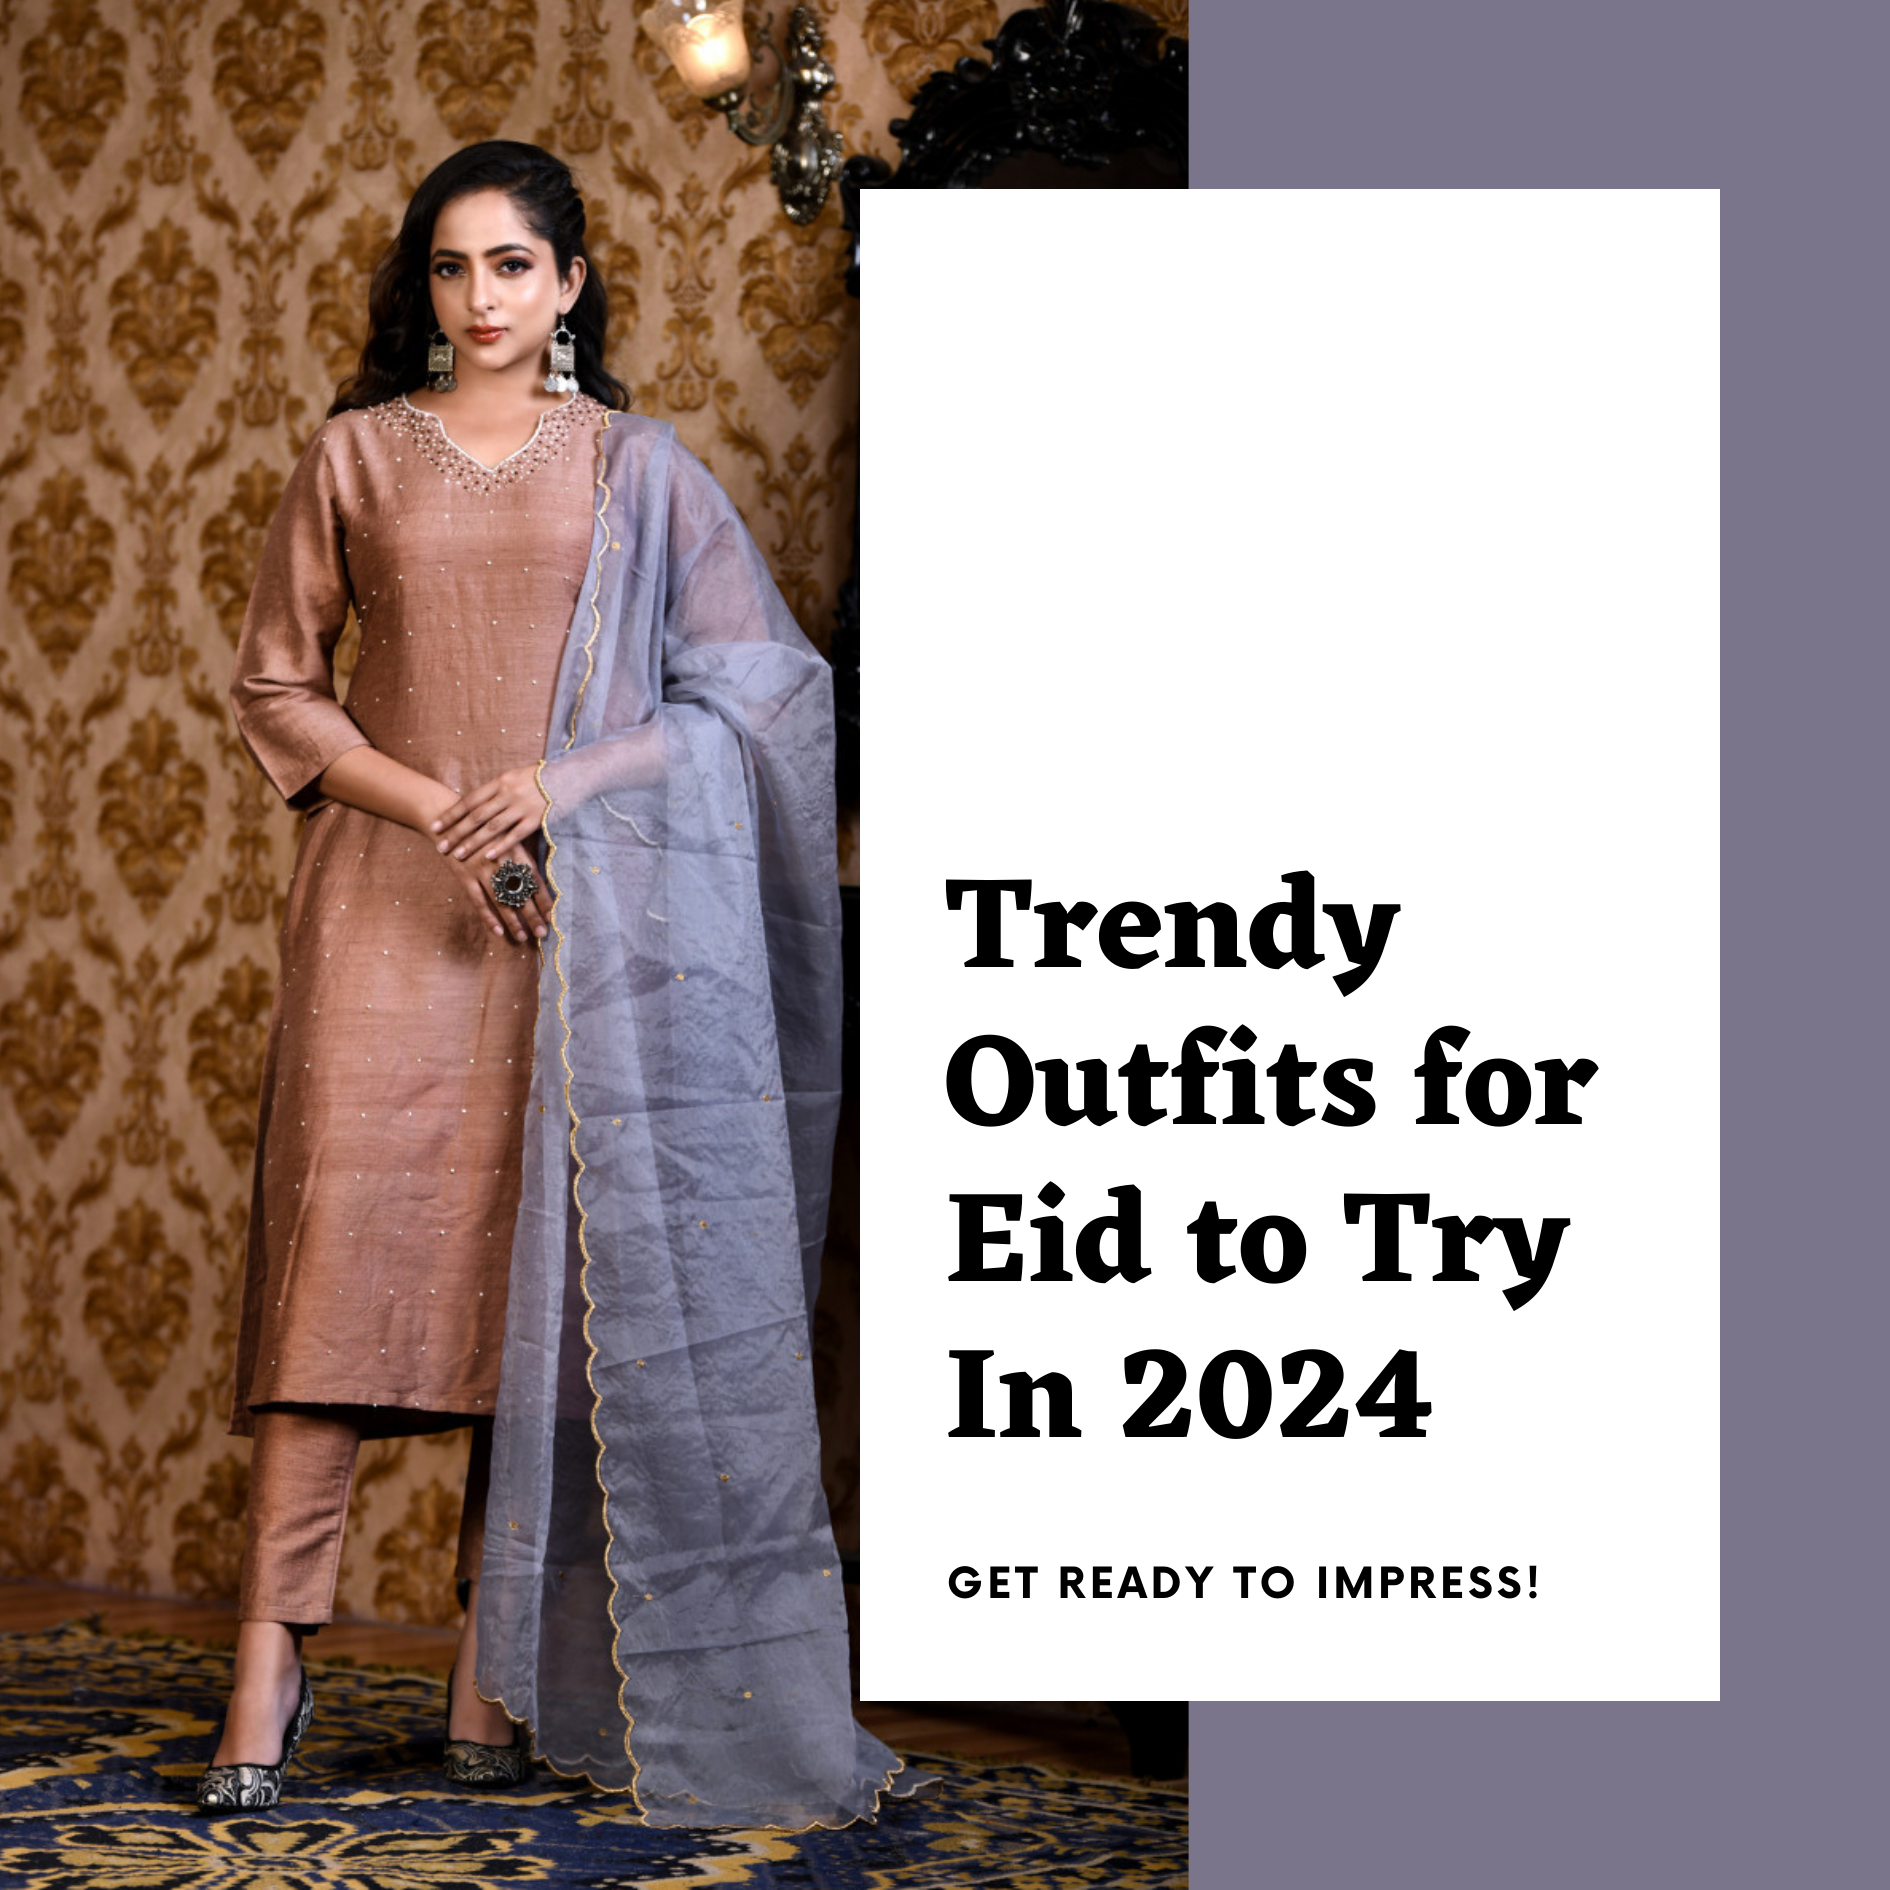 Trendy Outfits for Eid to Try In 2024